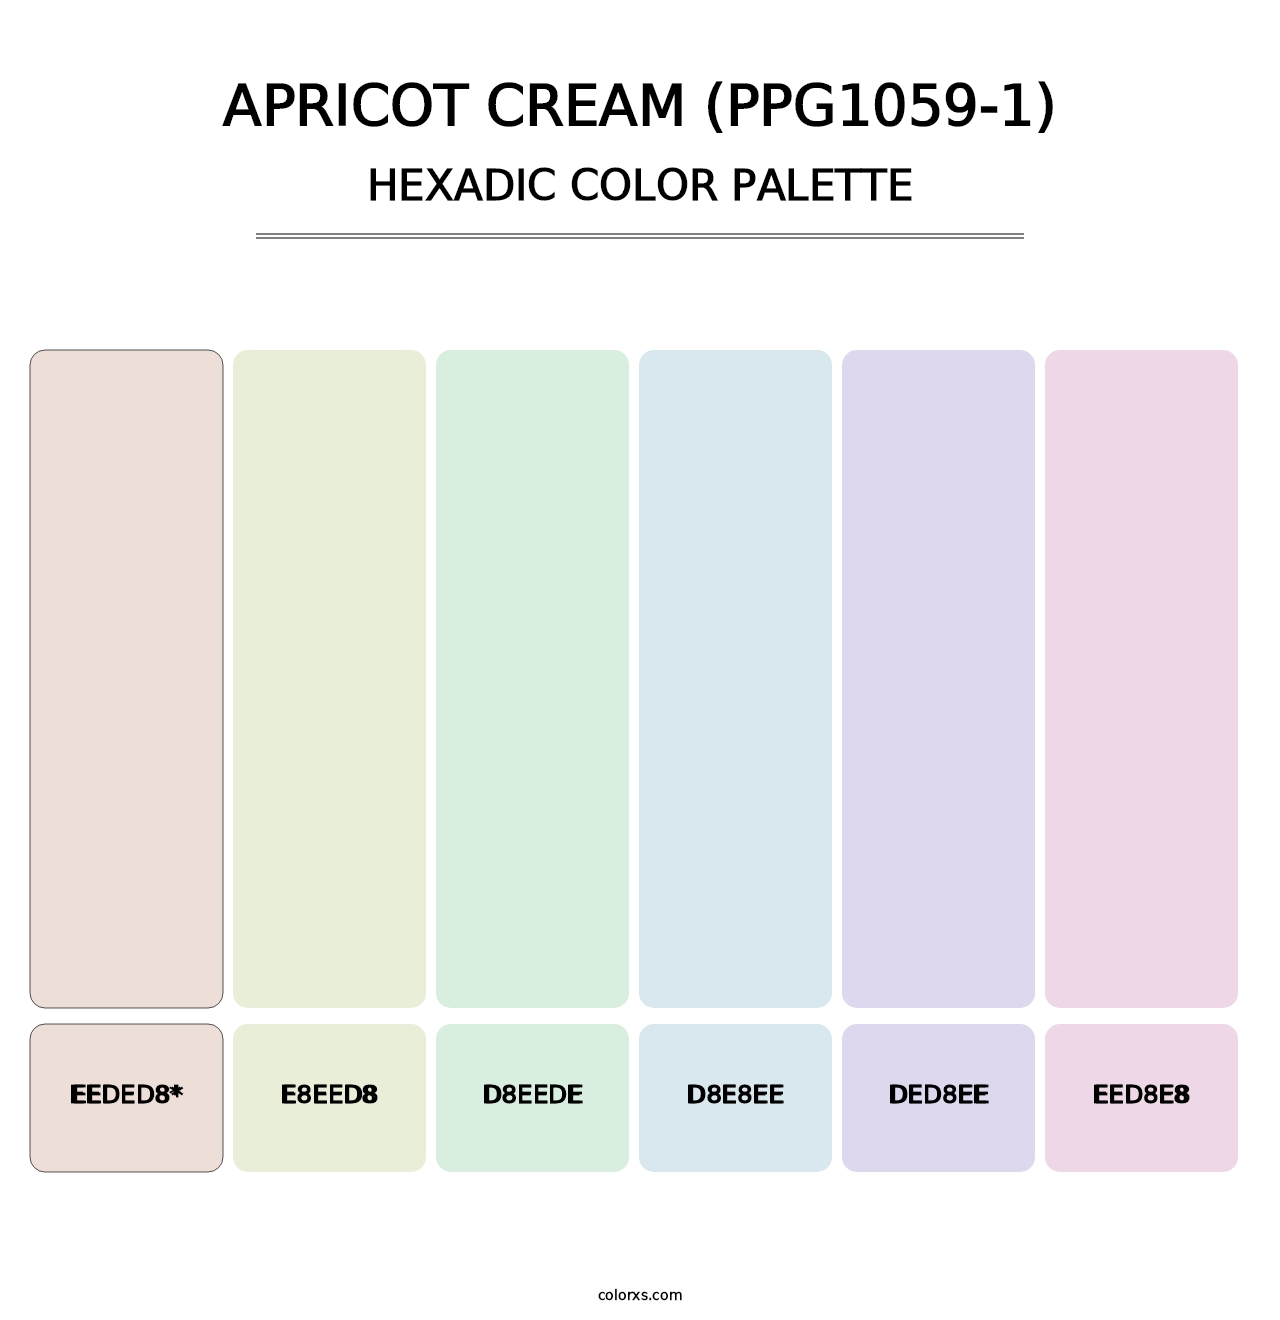 Apricot Cream (PPG1059-1) - Hexadic Color Palette